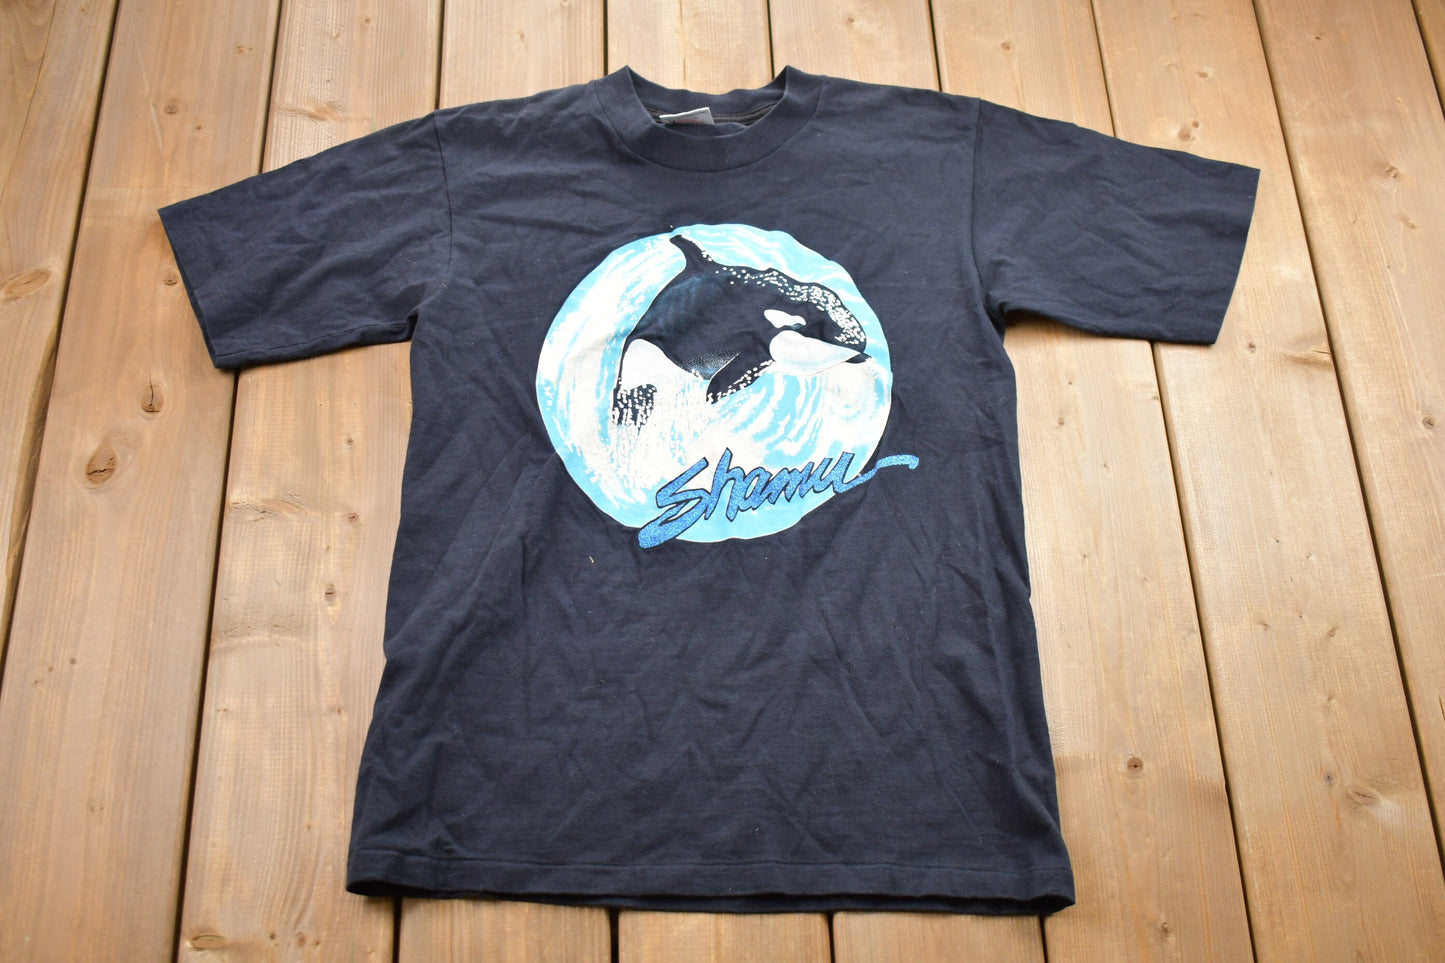 Vintage 1990s Shamu Whale Graphic T-Shirt / Graphic / 80s / 90s / Streetwear / Retro Style / Single Stitch / Made In USA